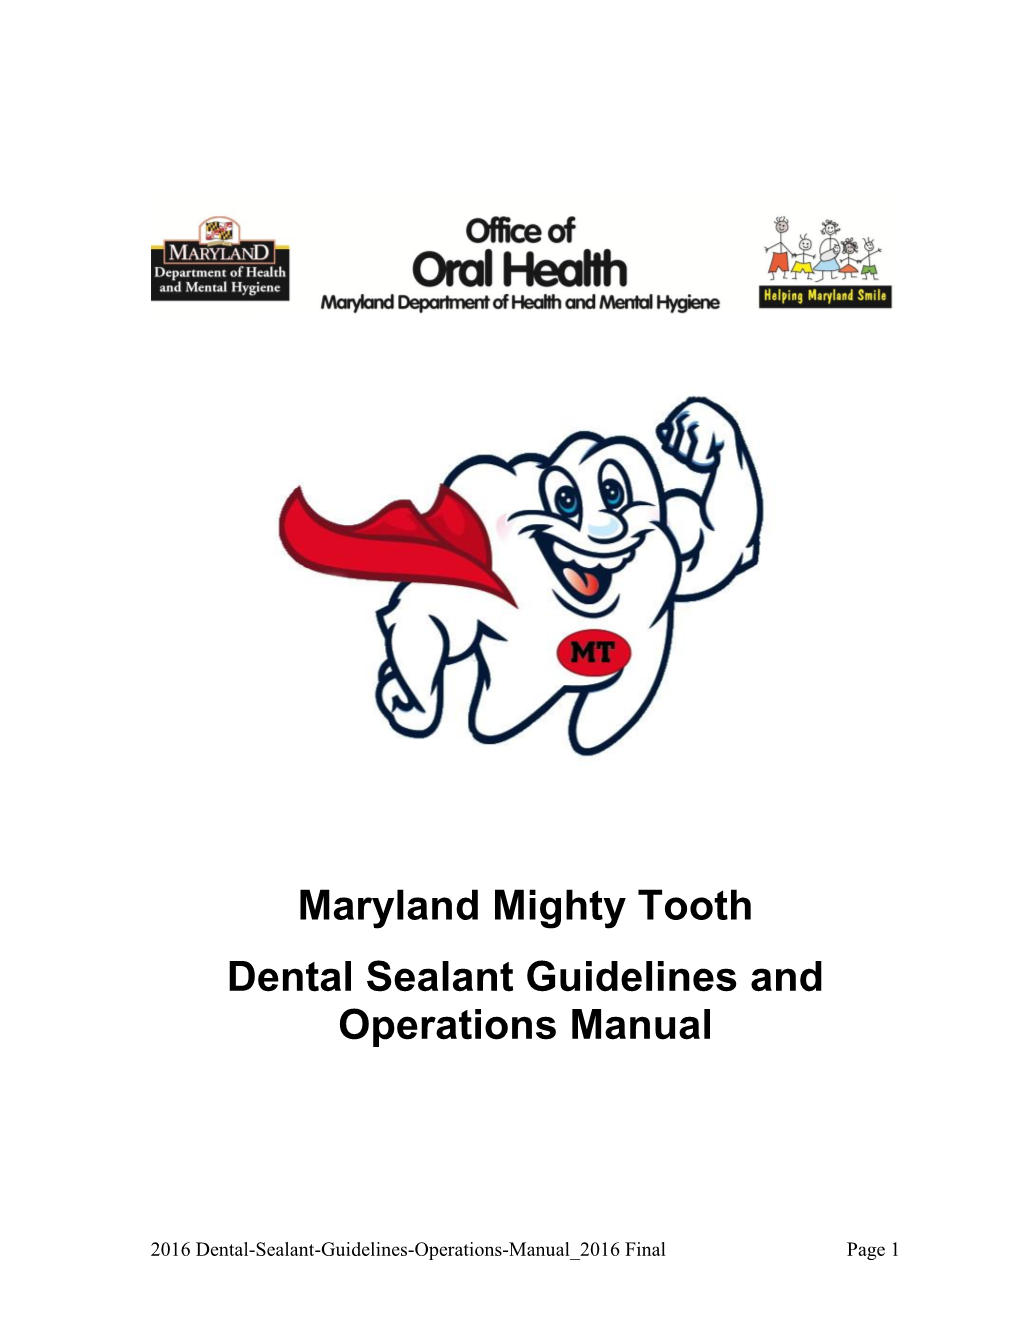 Dental Sealant Guidelines and Operations Manual